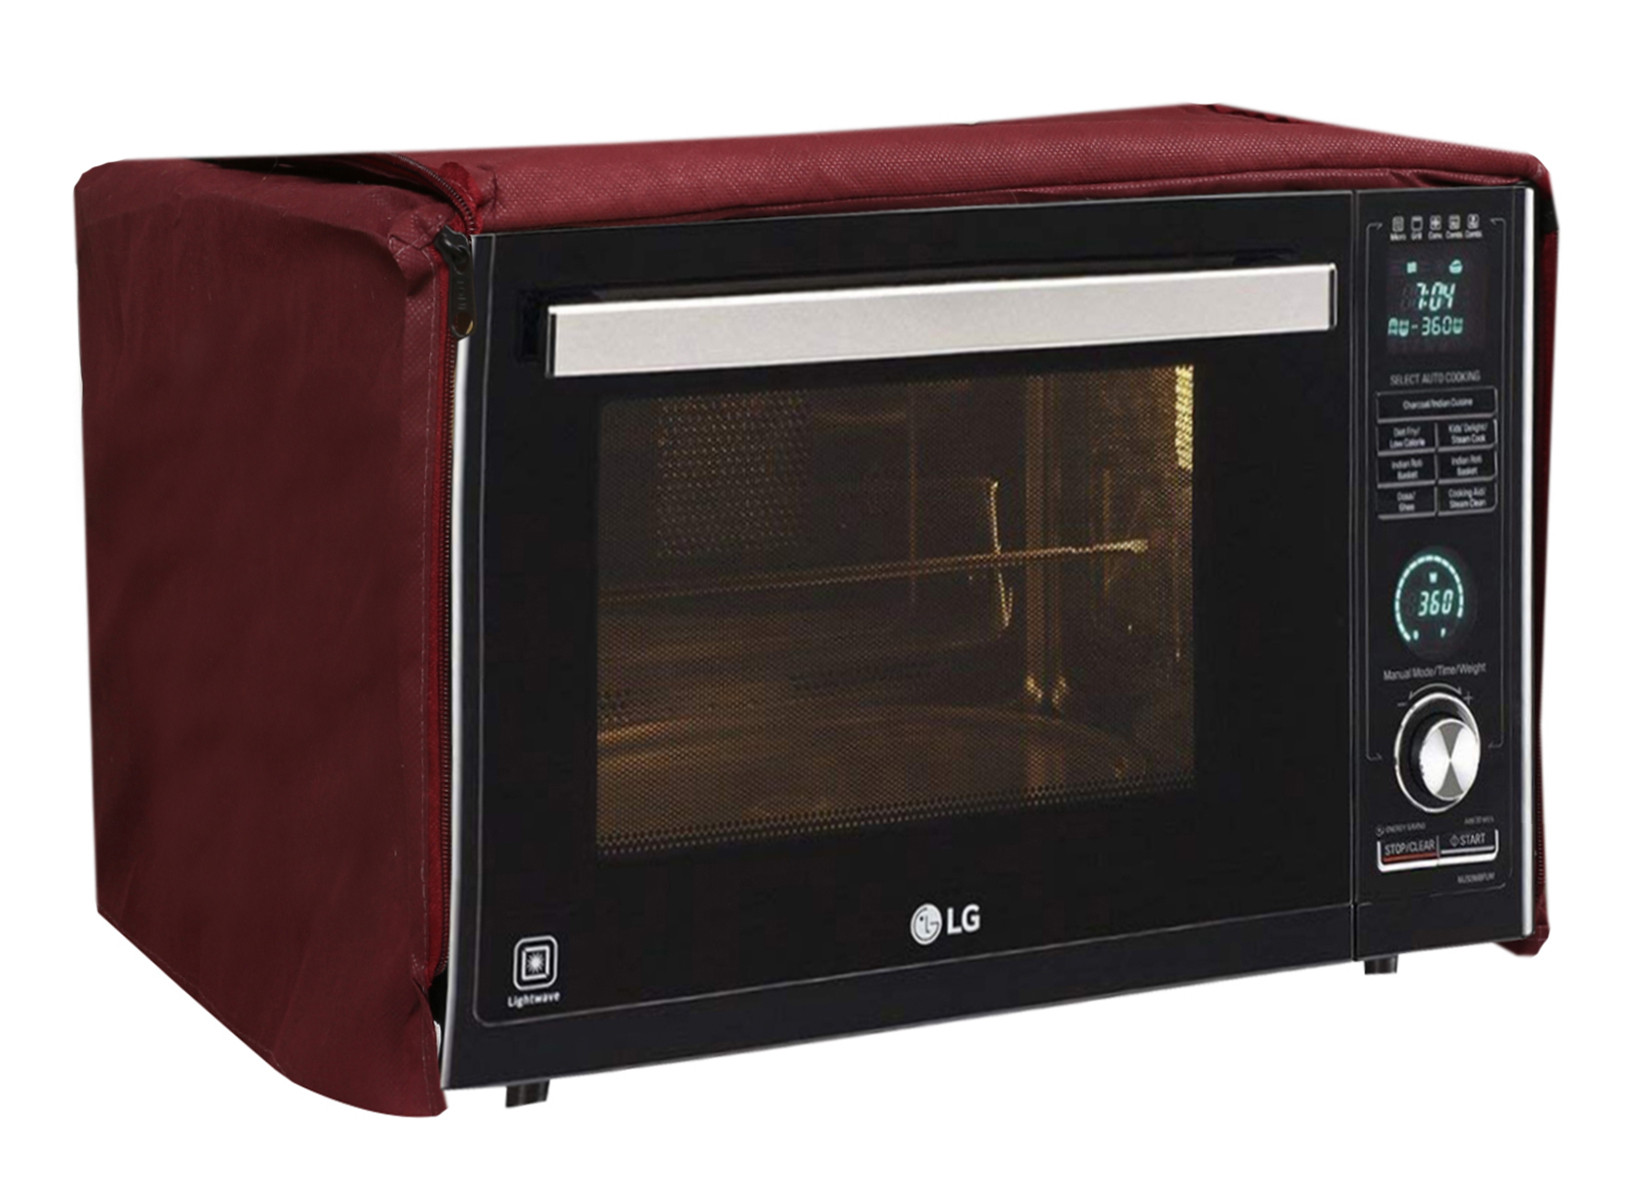 Kuber Industries PVC Leaf Printed Microwave Oven Cover,30 Ltr. (Brown)-HS43KUBMART25967